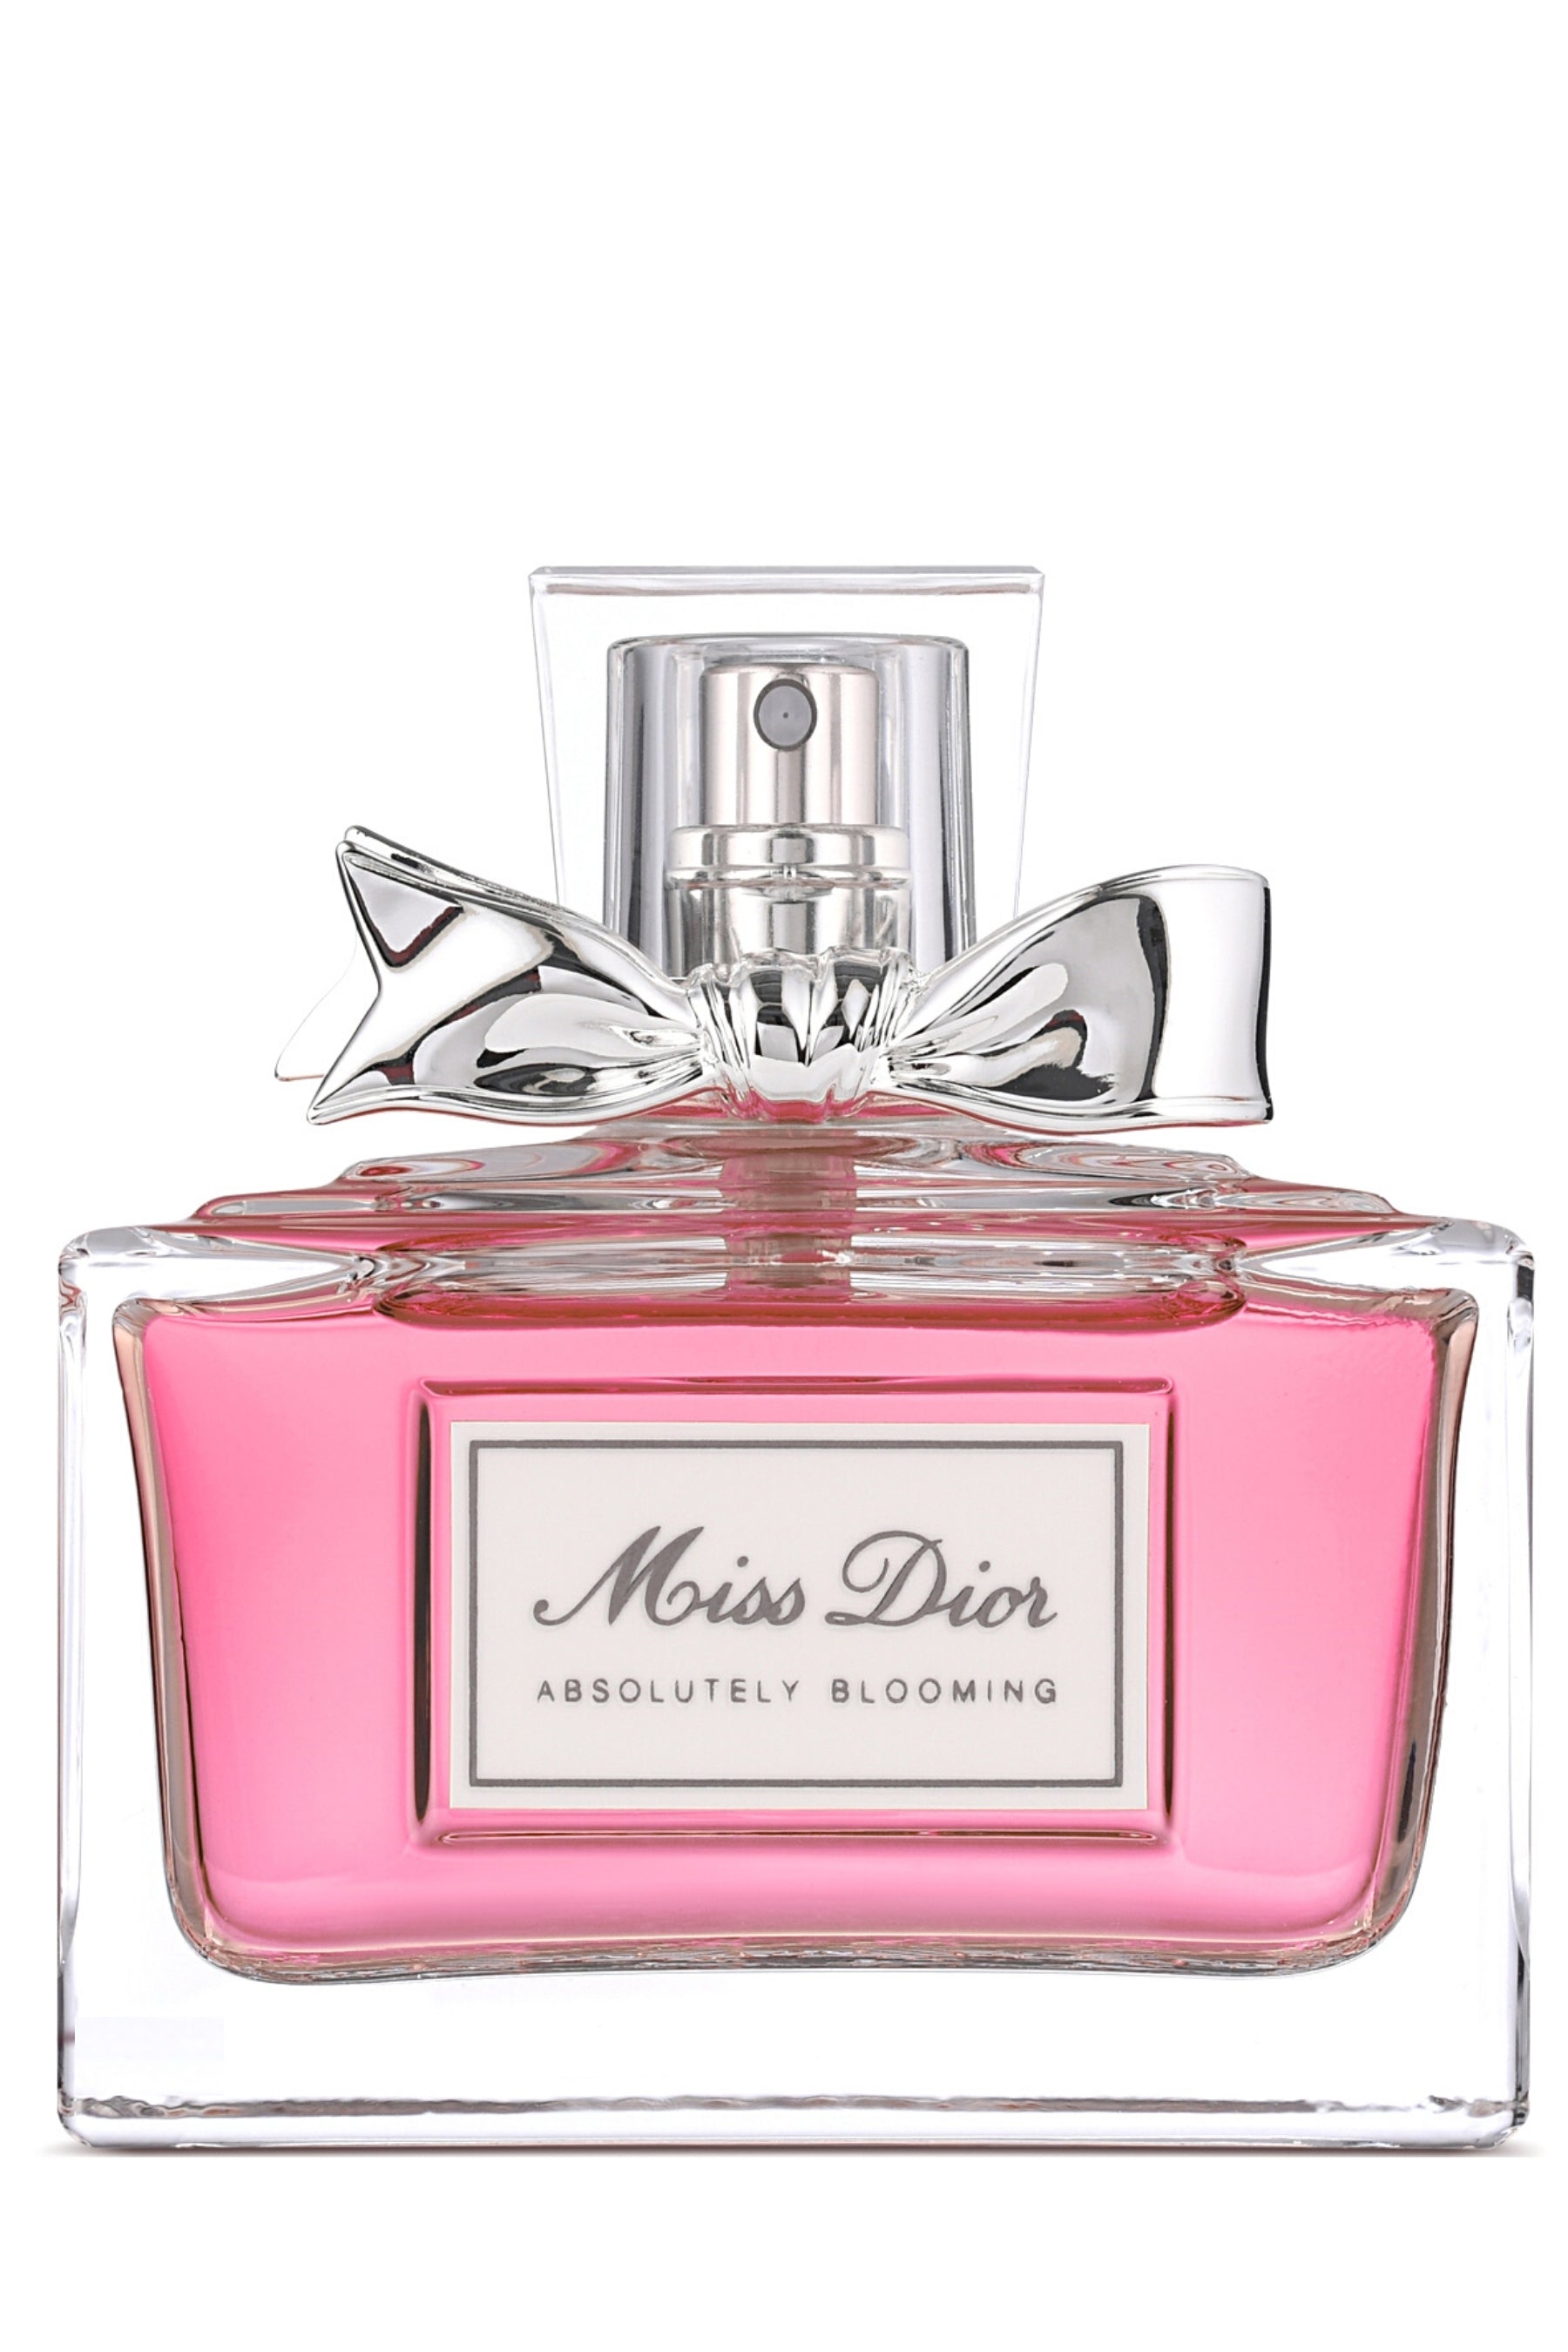 Dior  Miss Dior Absolutely Blooming  REBL